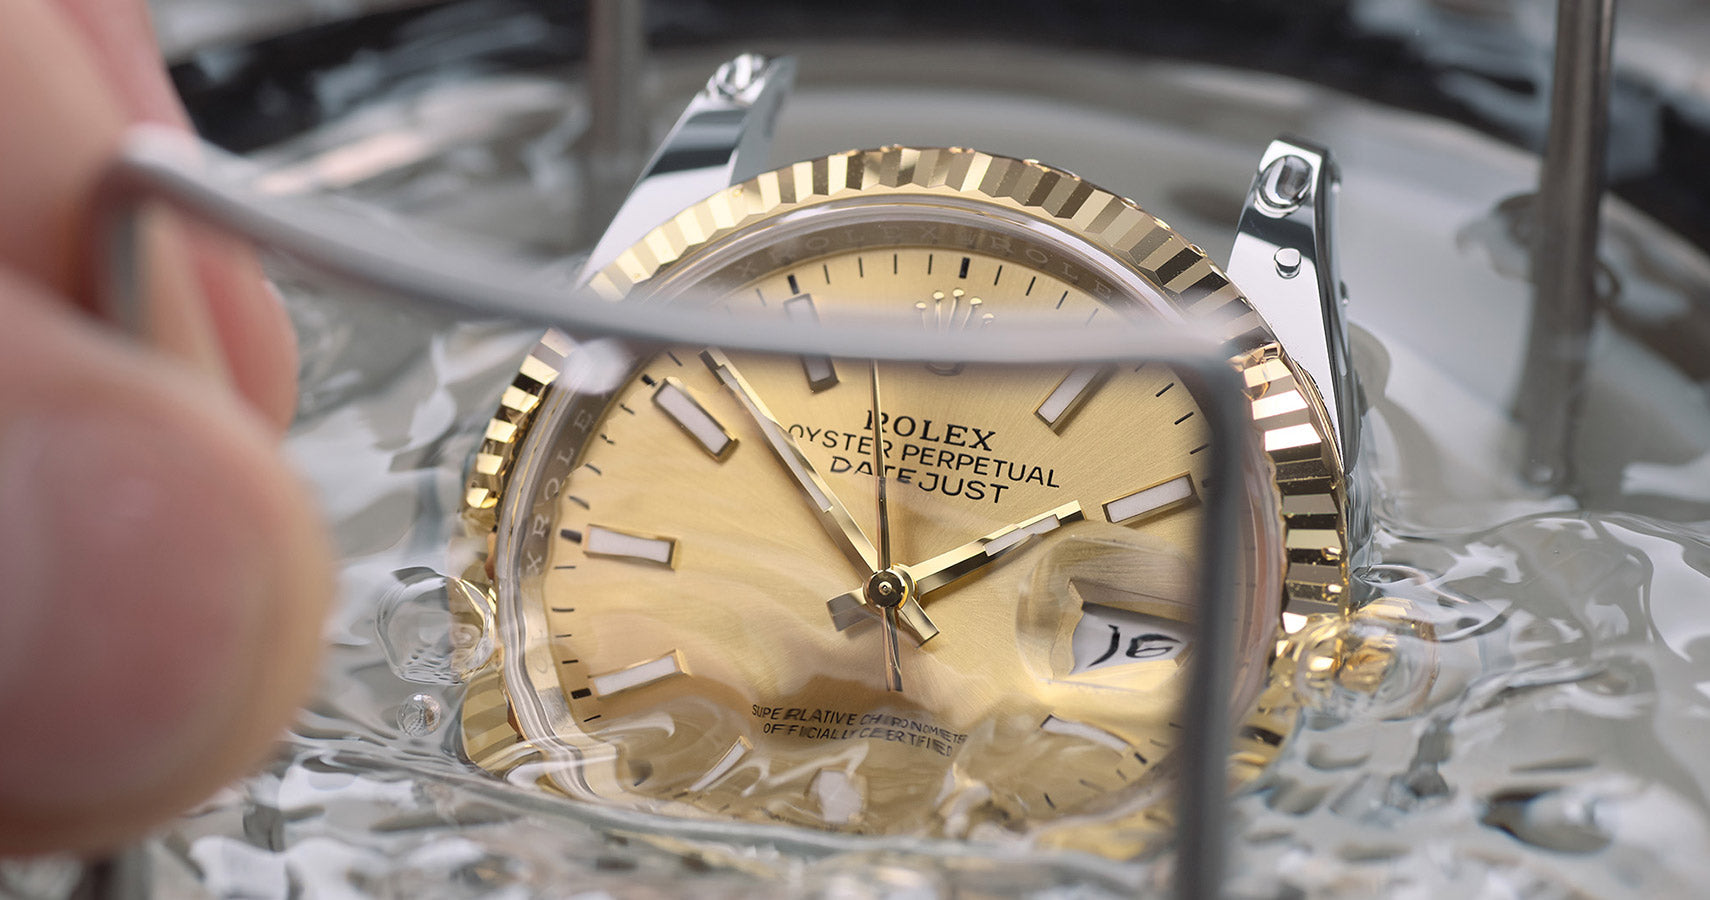 Professionally cleaning Rolex components